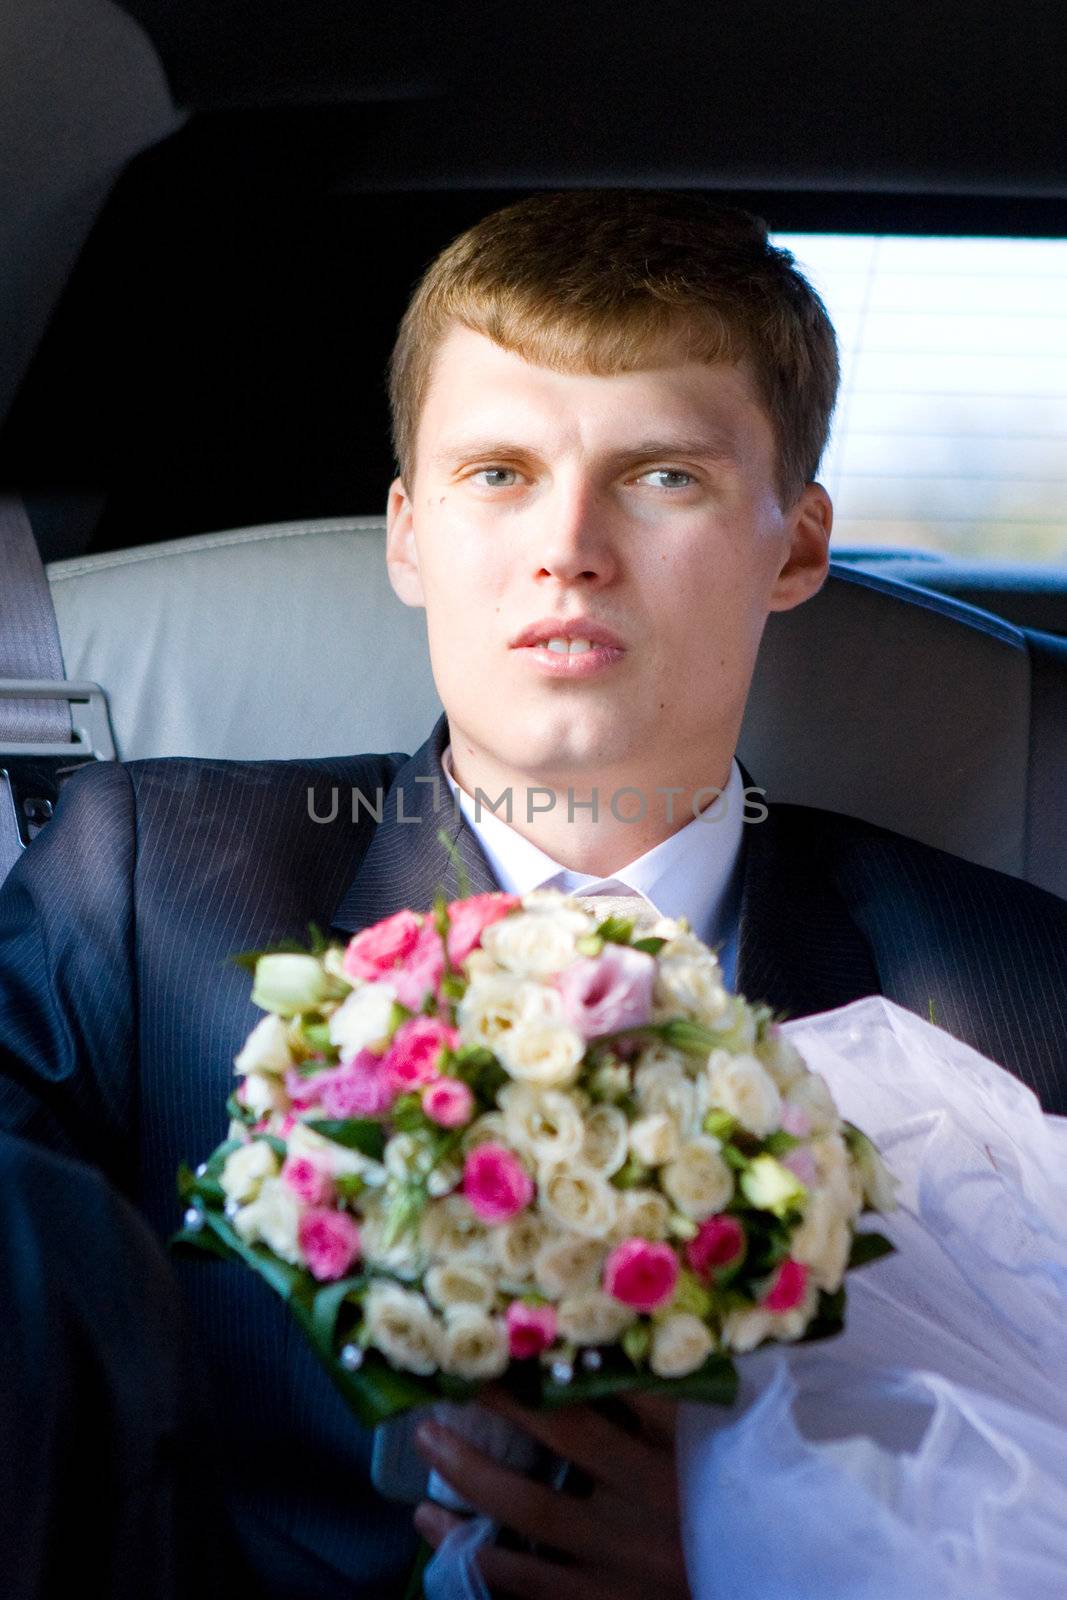 to meet bride in the car by vsurkov